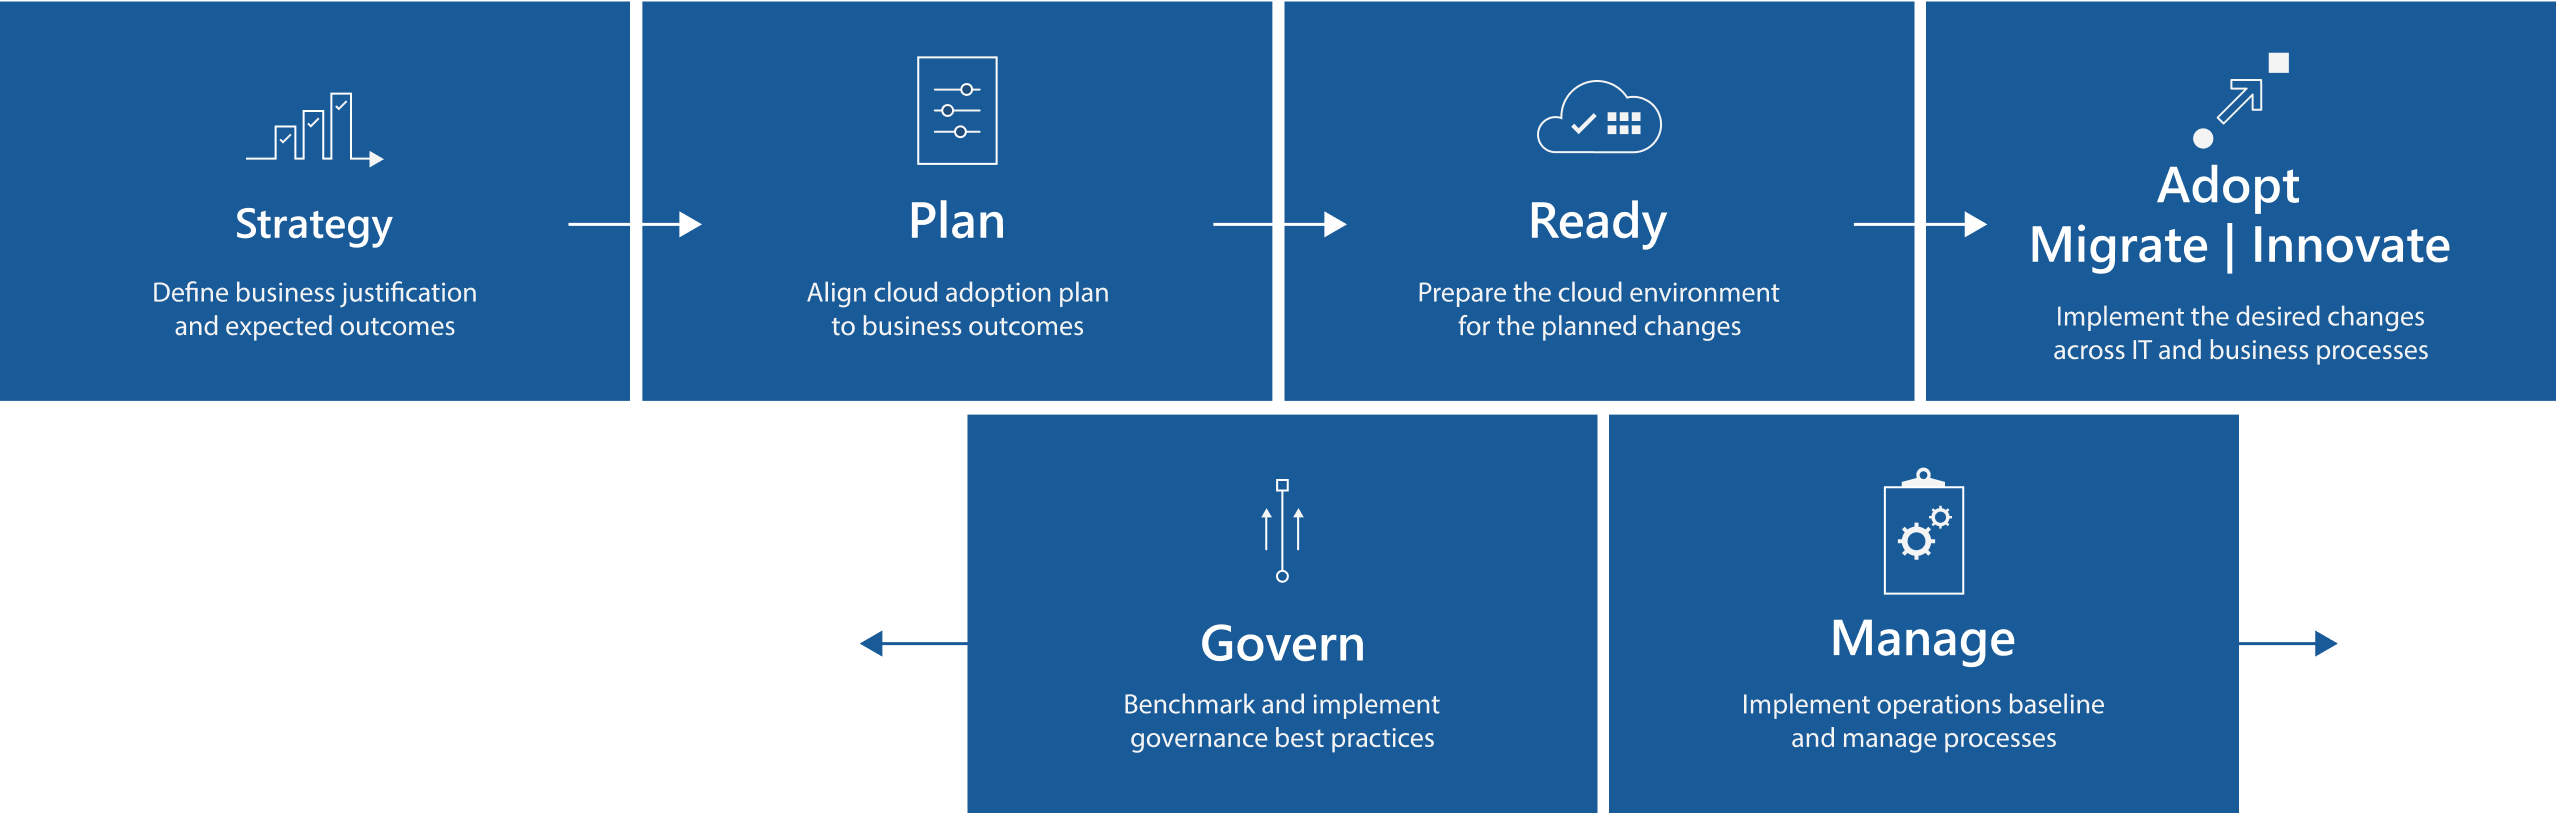 caf-diagram Common Cloud Adoption Missteps during the Strategy and Planning Phase